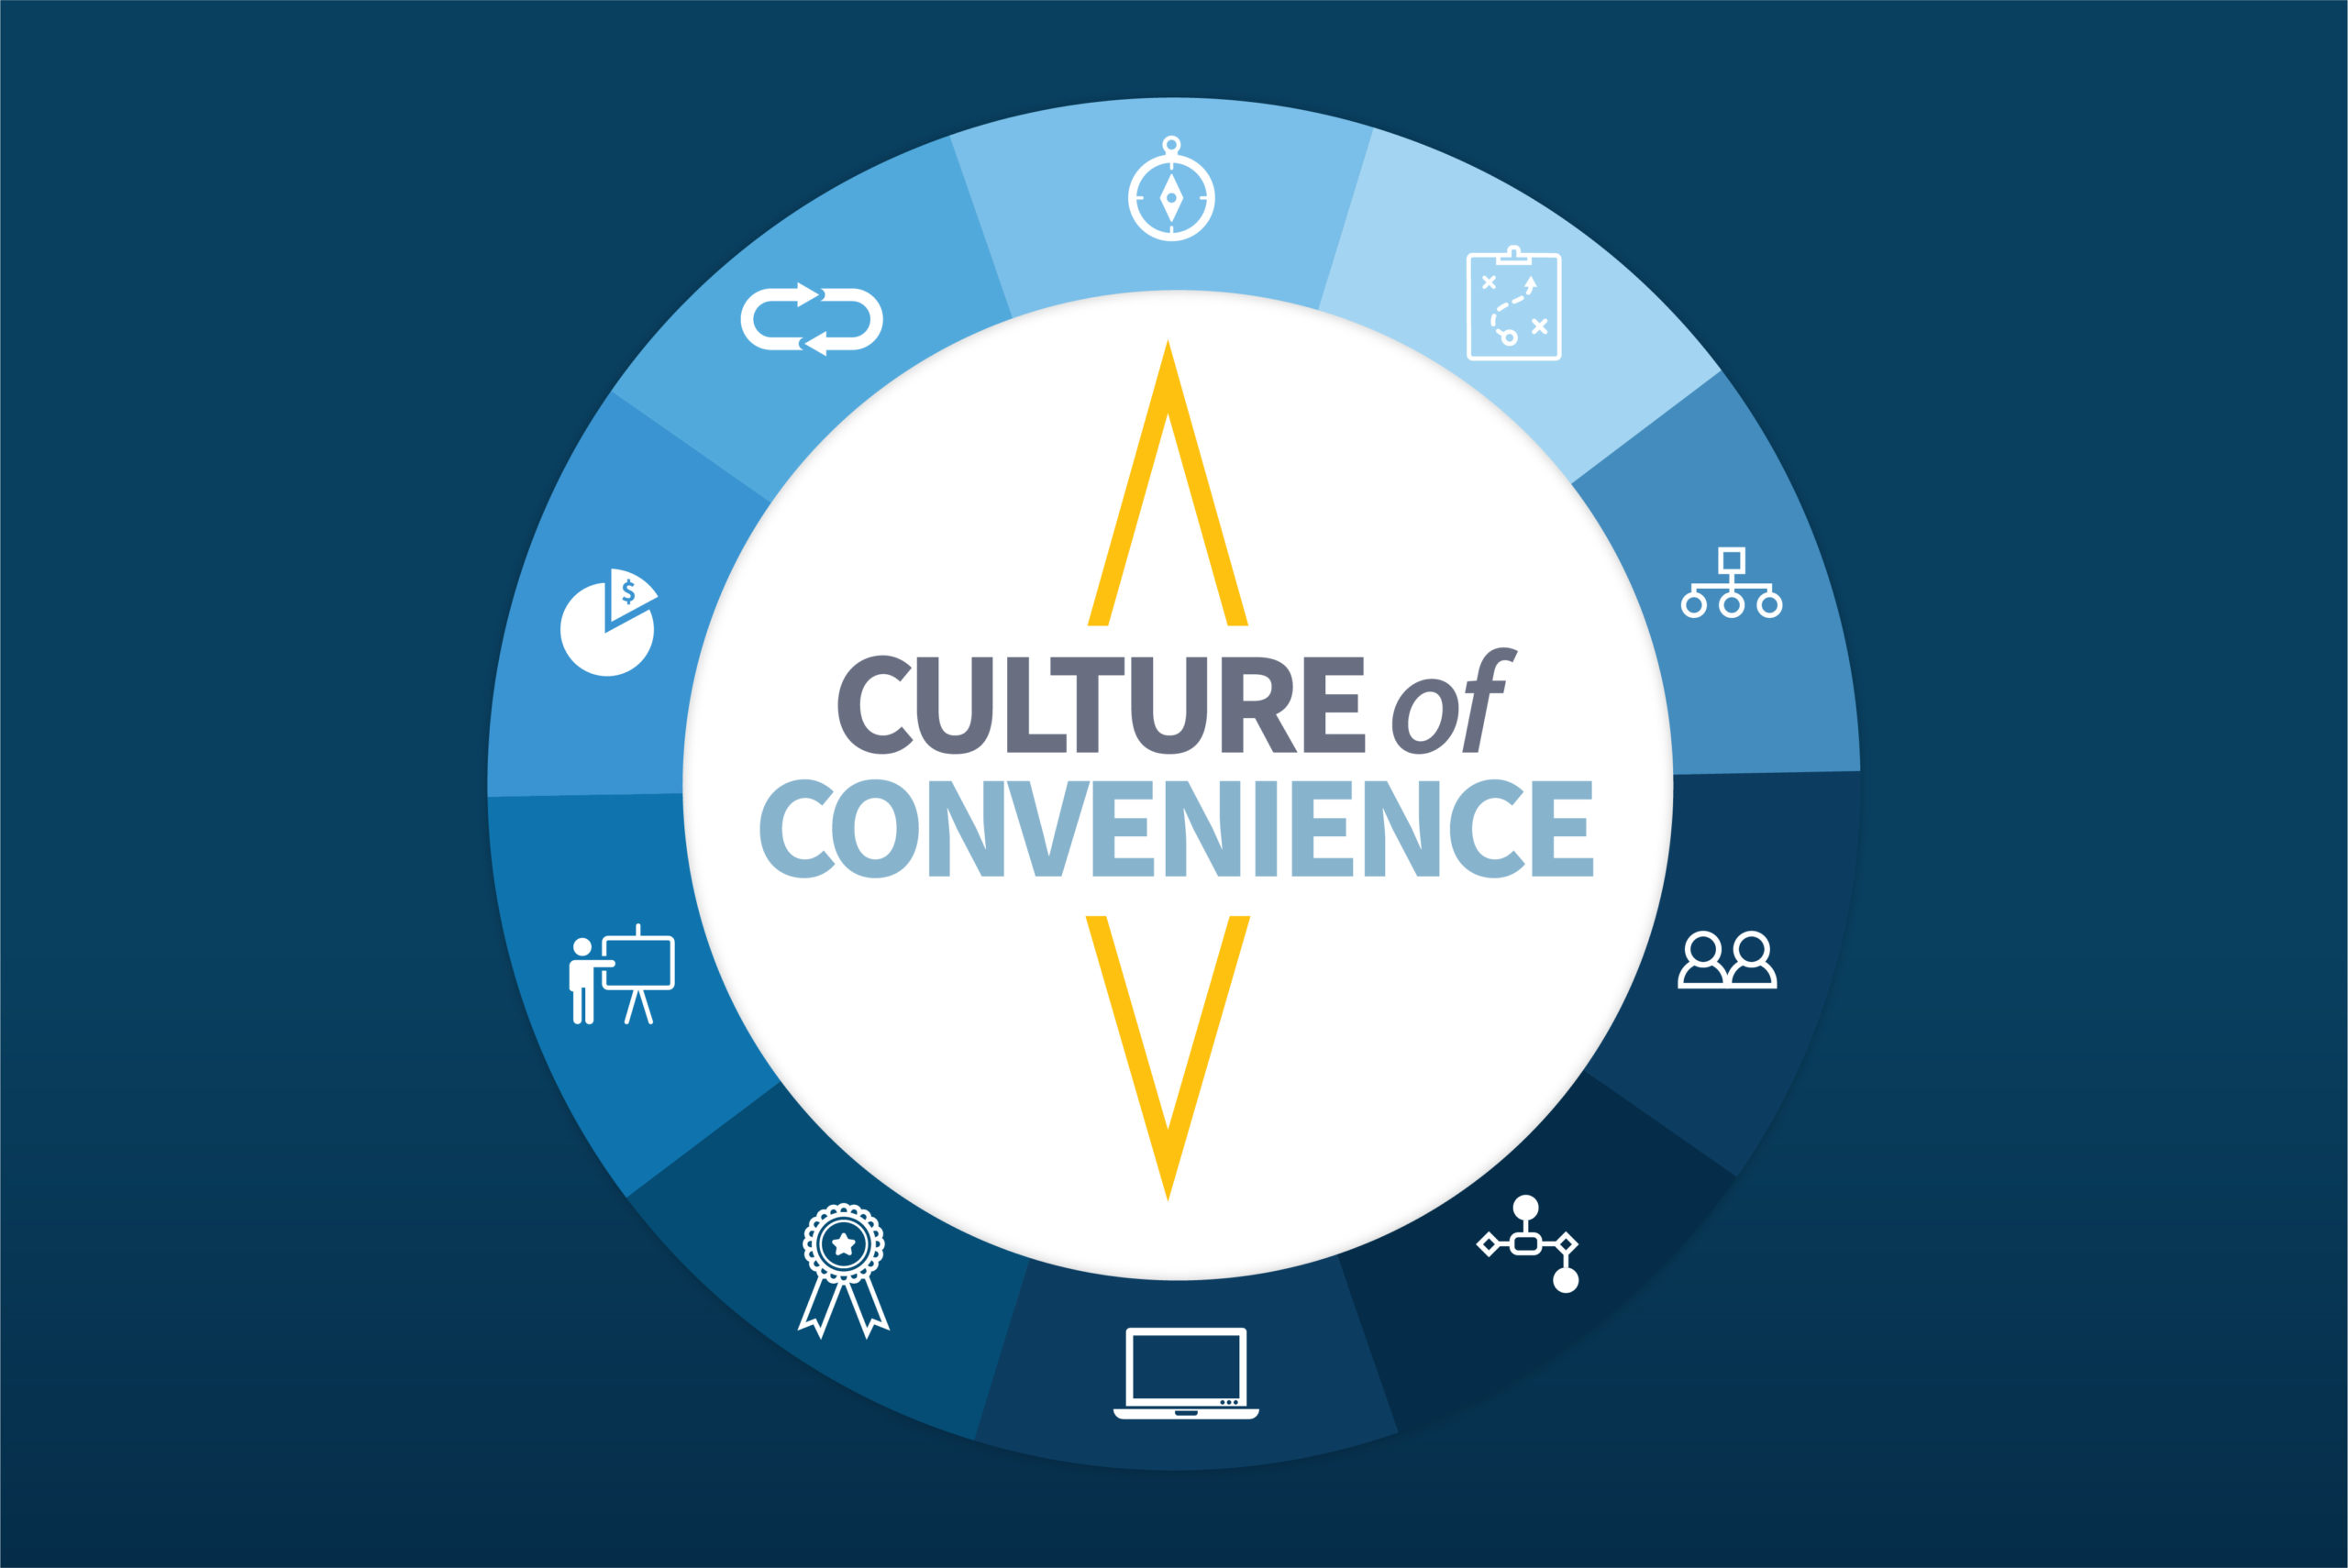 Build Your Culture of Convenience with These 10 Strategic Elements